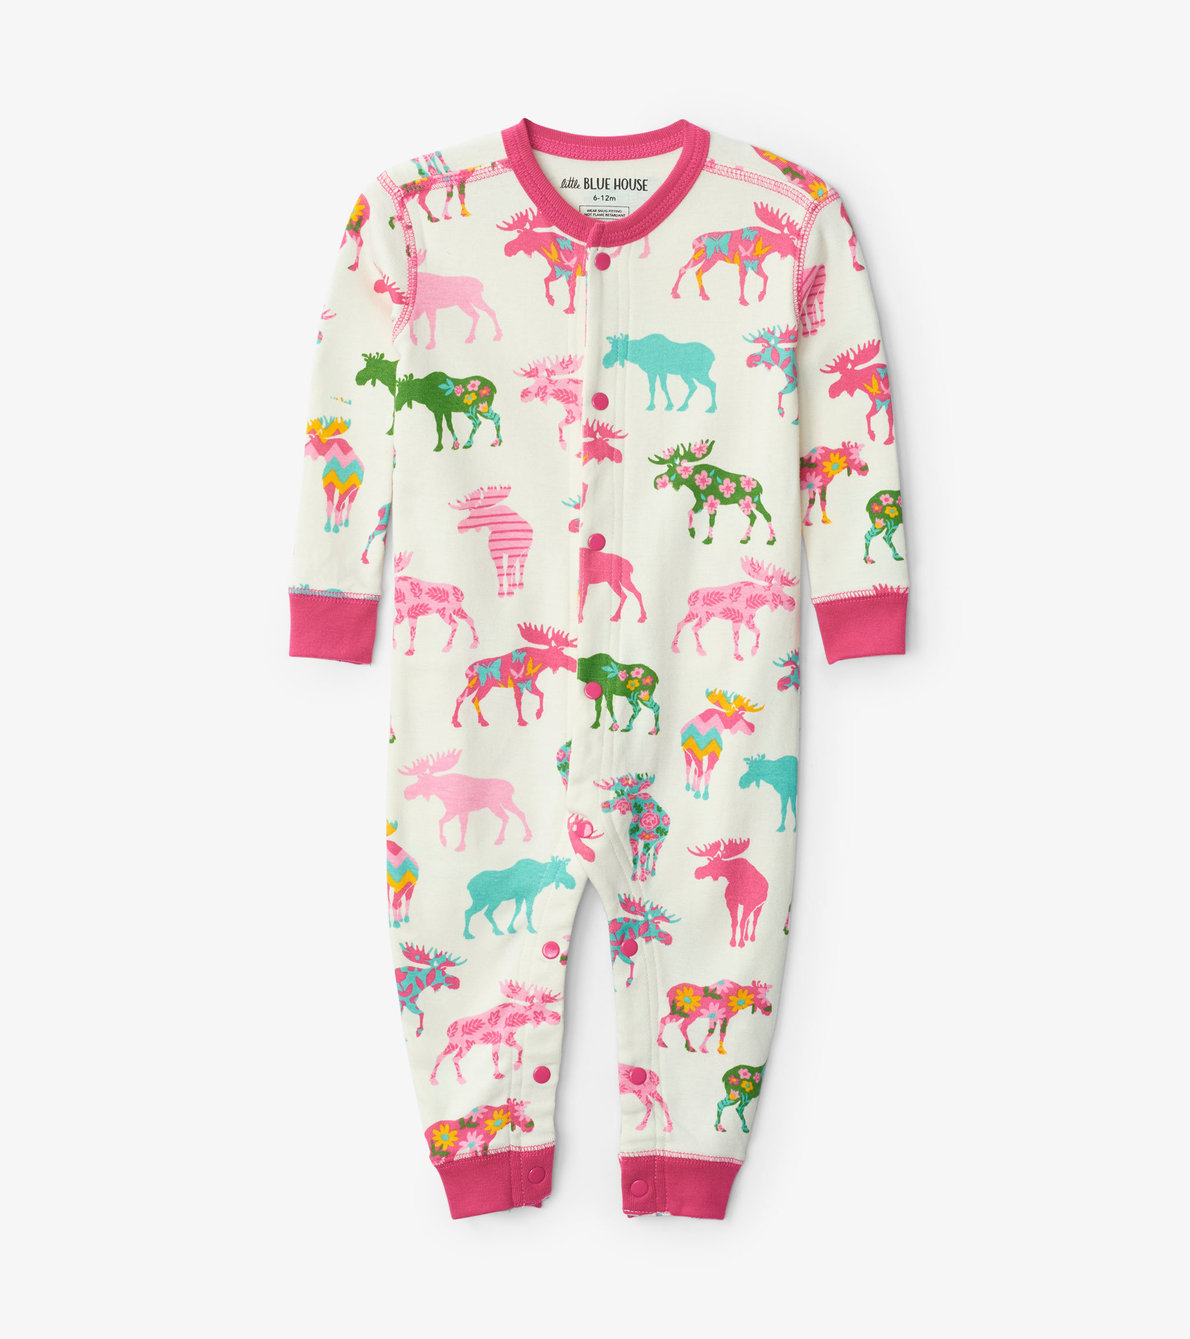 View larger image of Patterned Moose Baby Union Suit